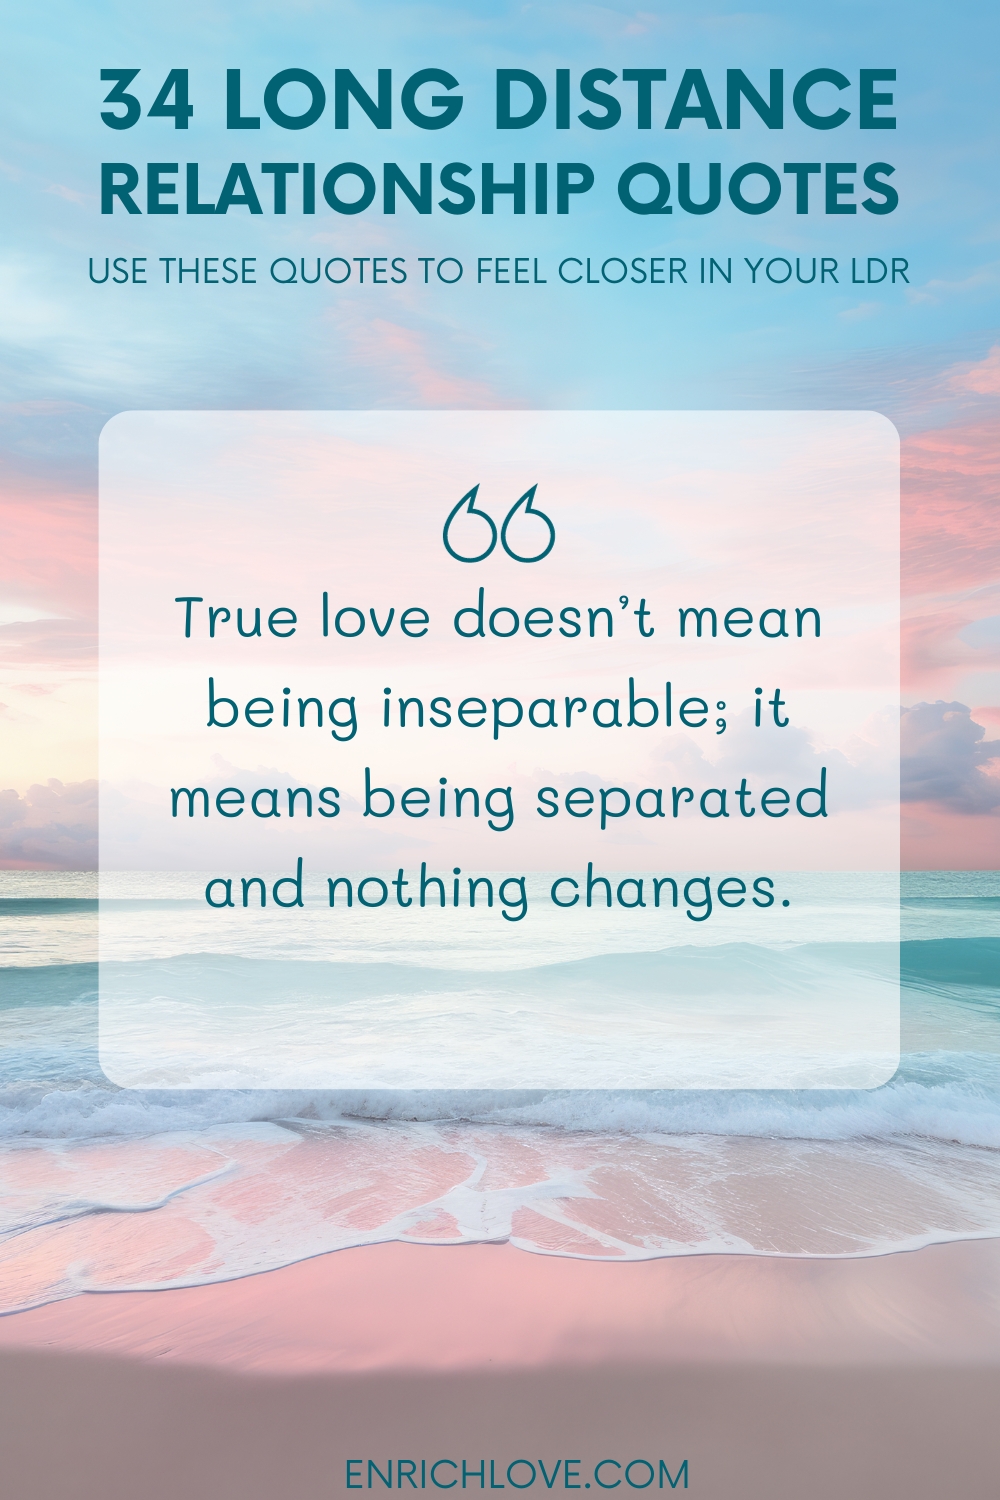 34 Long Distance Relationship Quotes - True love doesn’t mean being inseparable; it means being separated and nothing changes.